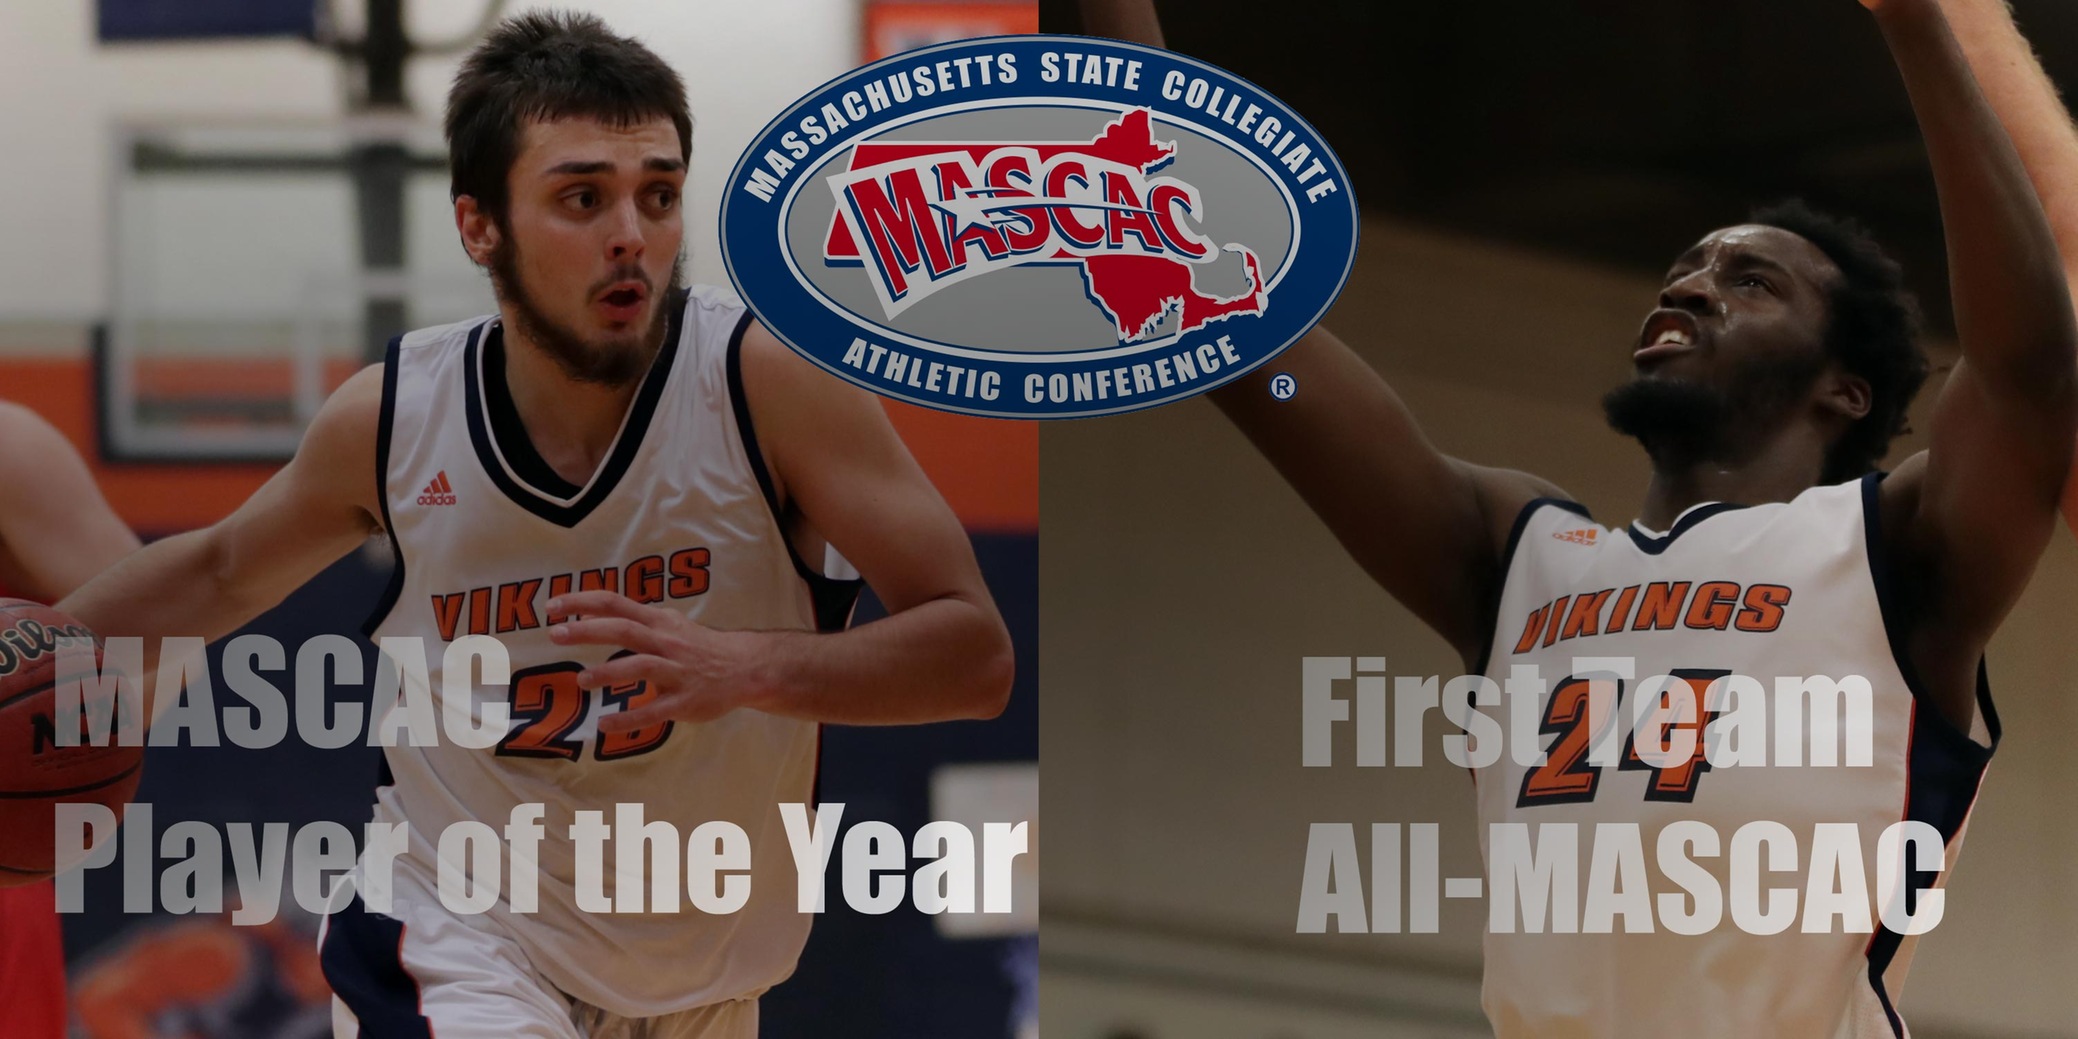 Bryan Earns MASCAC Player of the Year Honors, Animashaun Named First Team